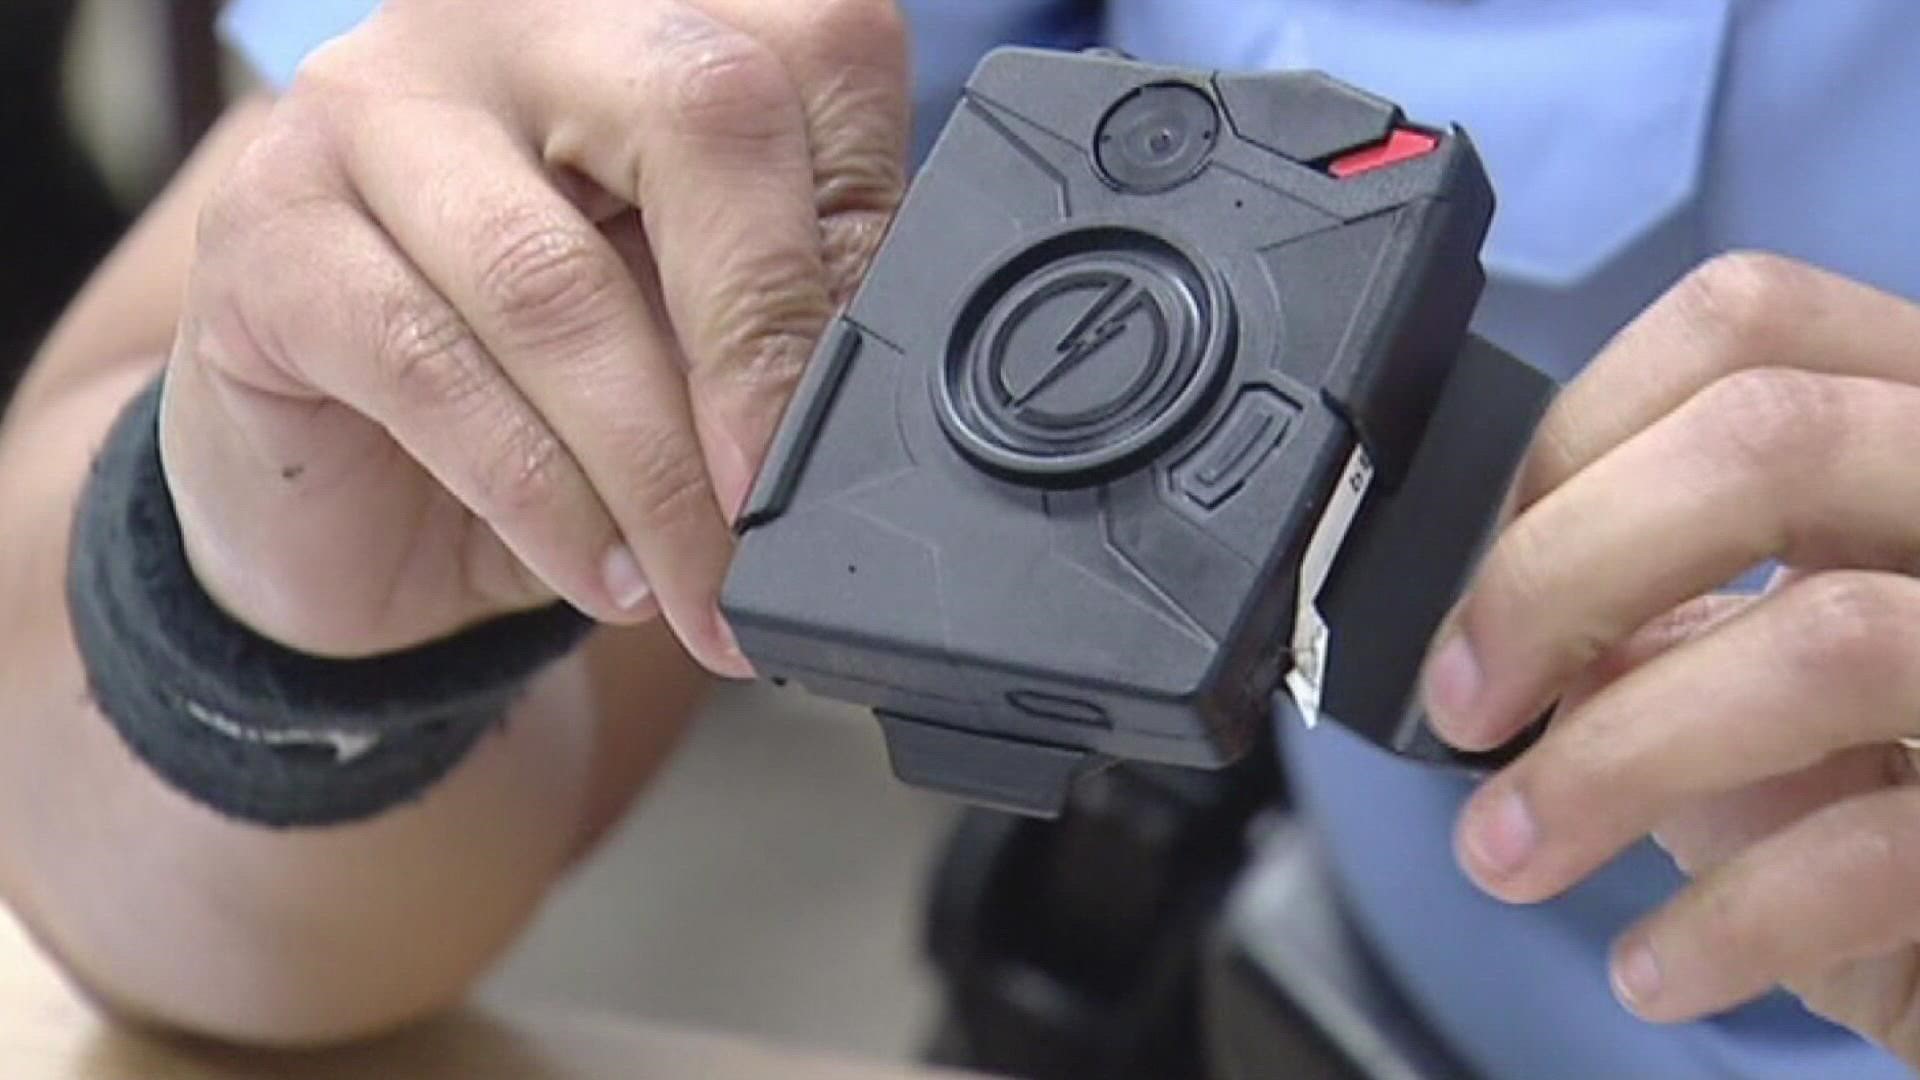 Sheriff Joe Lopinto has officially signed a contract for body cameras to be worn by all Jefferson Parish Sheriff Deputies.